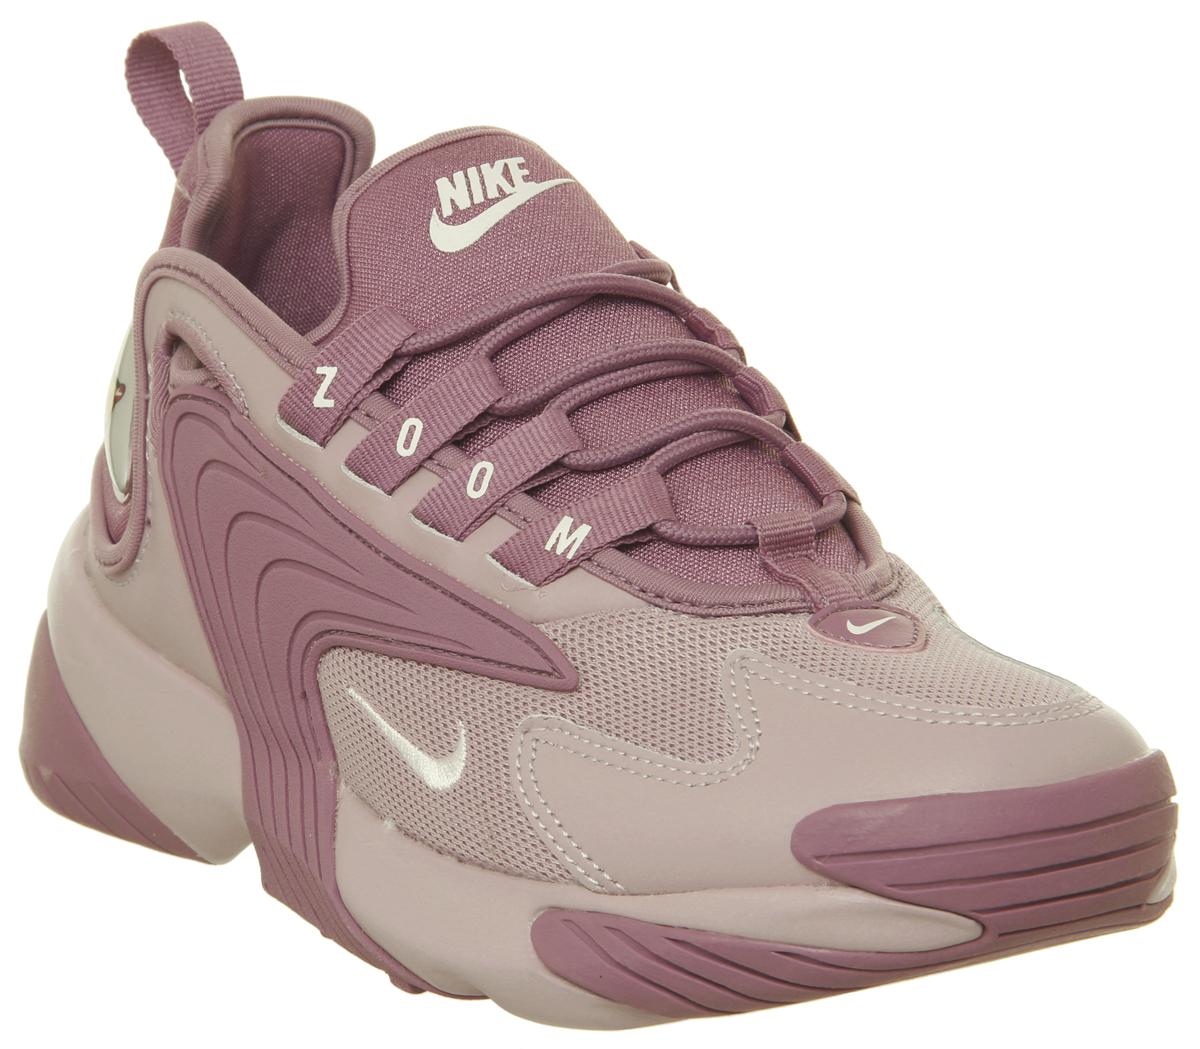 Nike Zoom 2k Trainers Plum Dust Pale Pink Plum Chalk F Hers Trainers